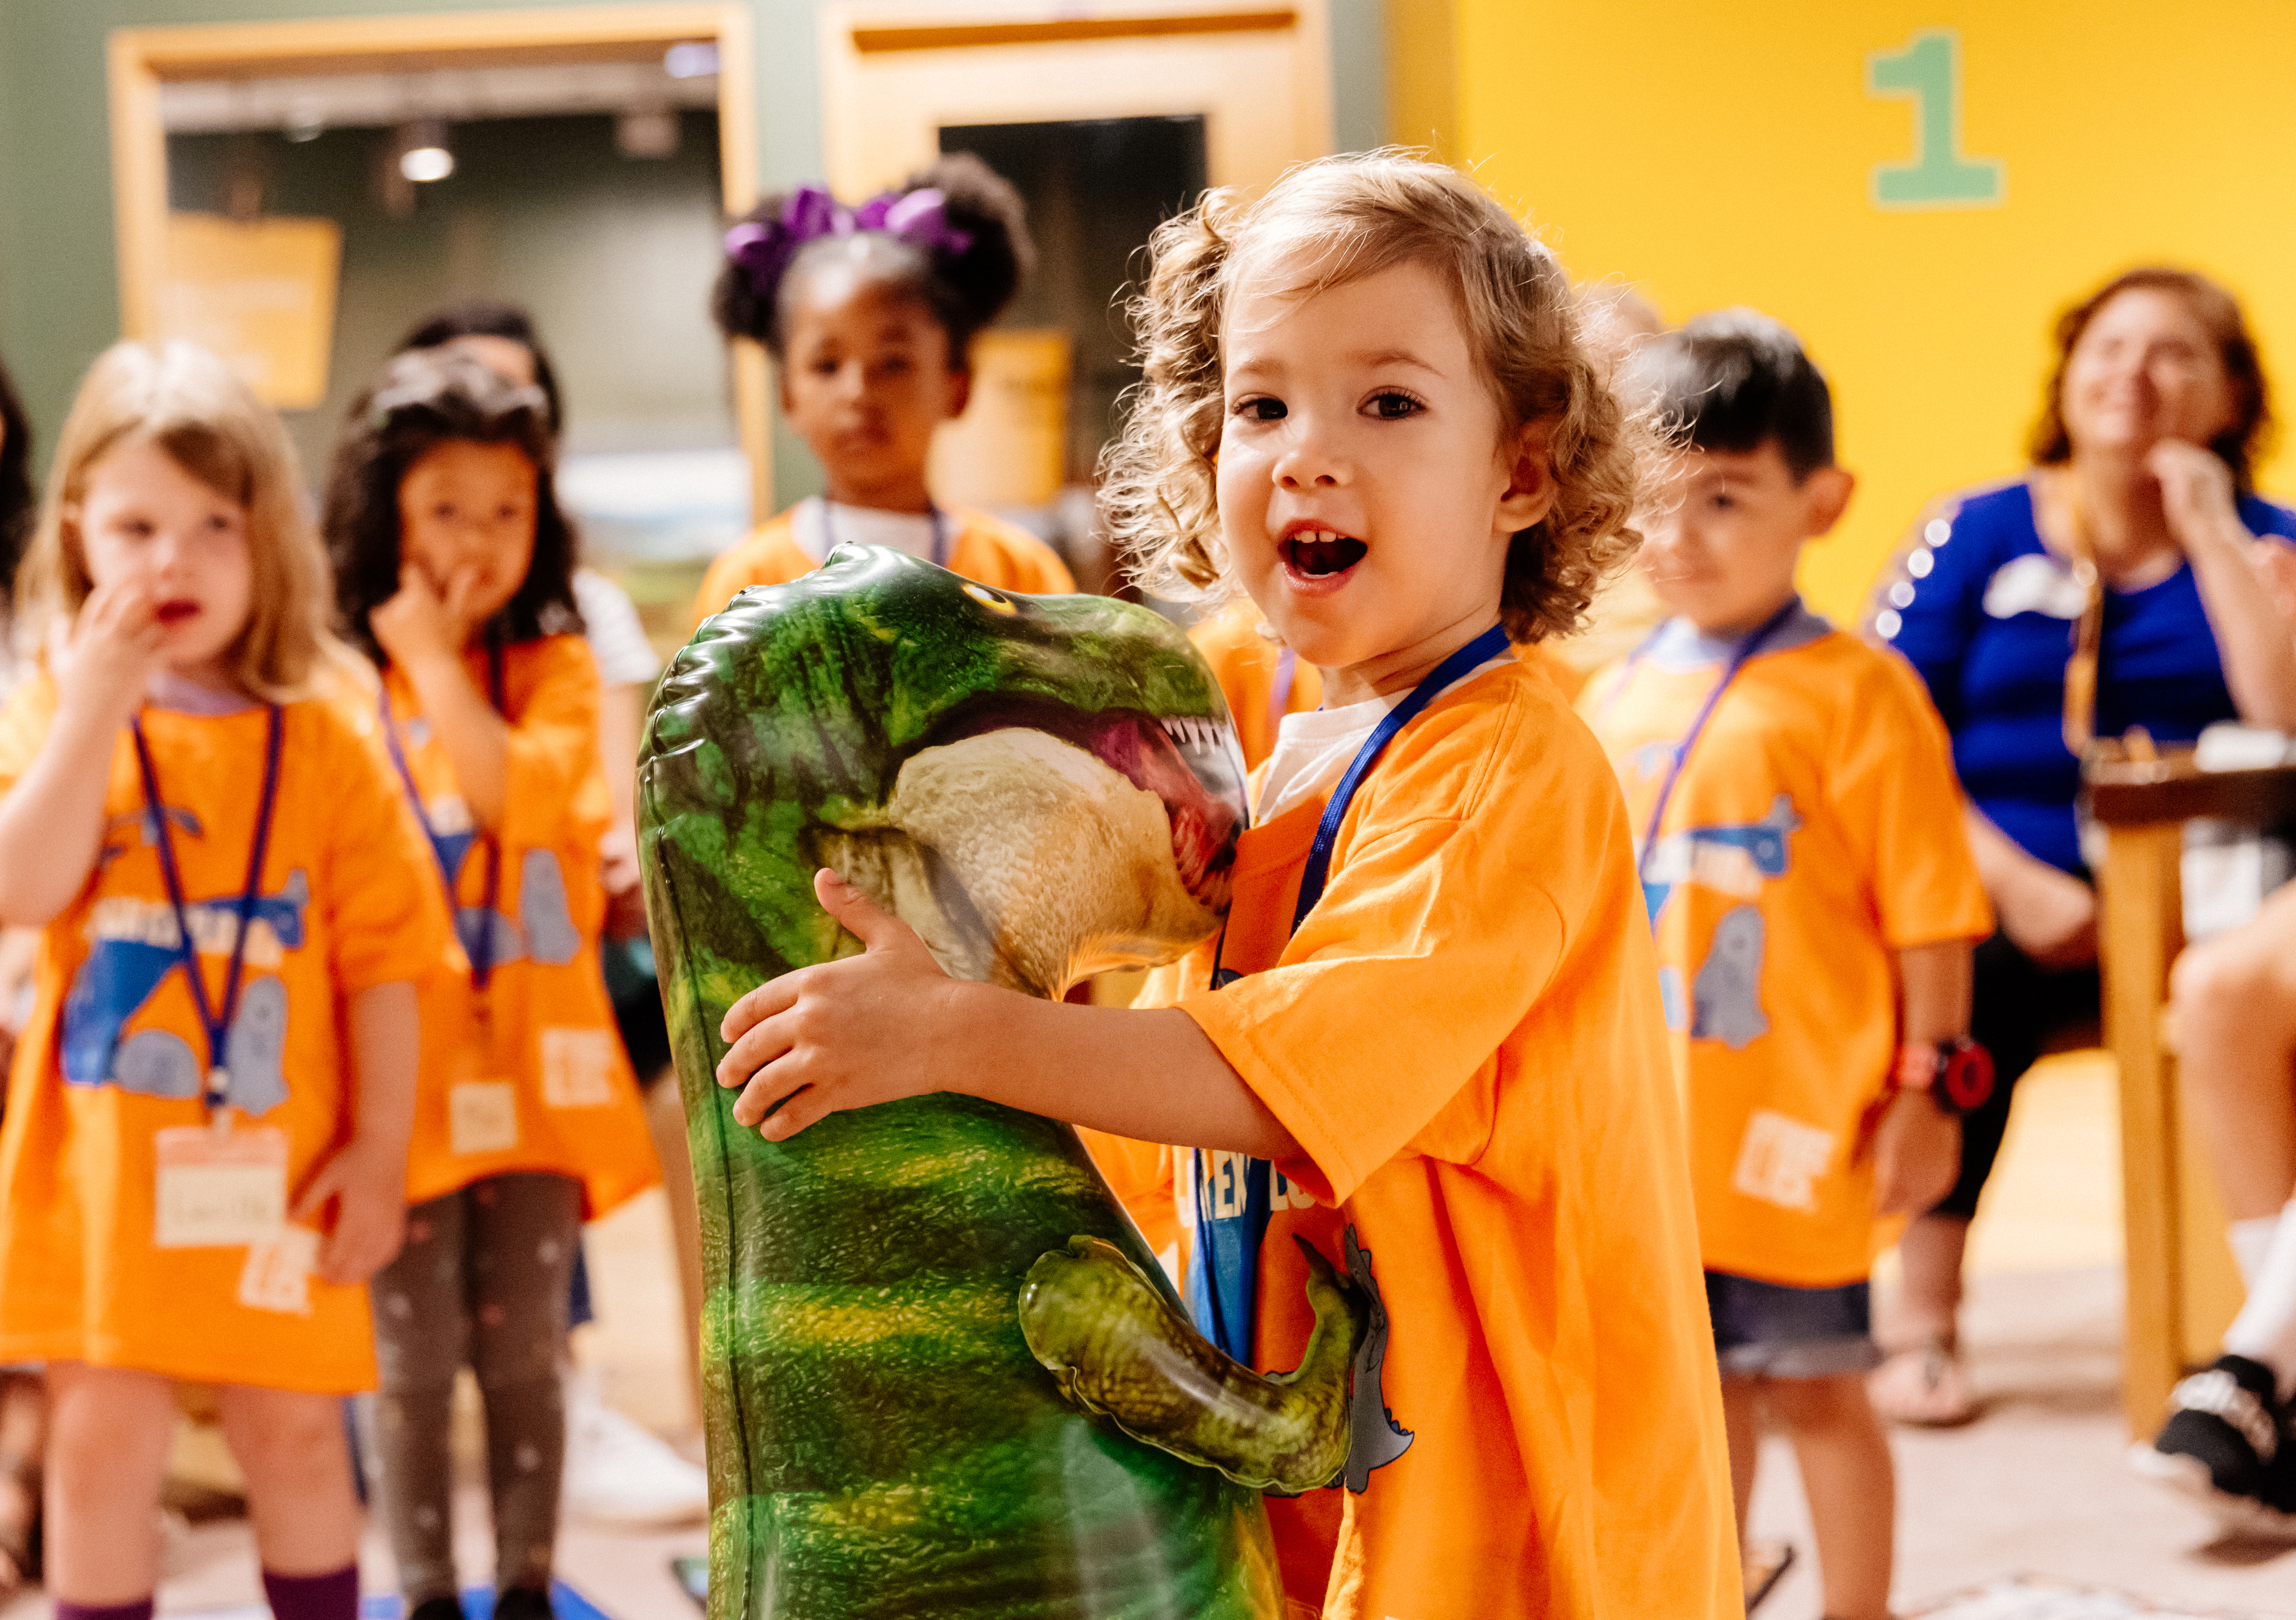 A young child holds a dinosaur balloon while a group of children can be seen in the background. All are wearing orange shirts